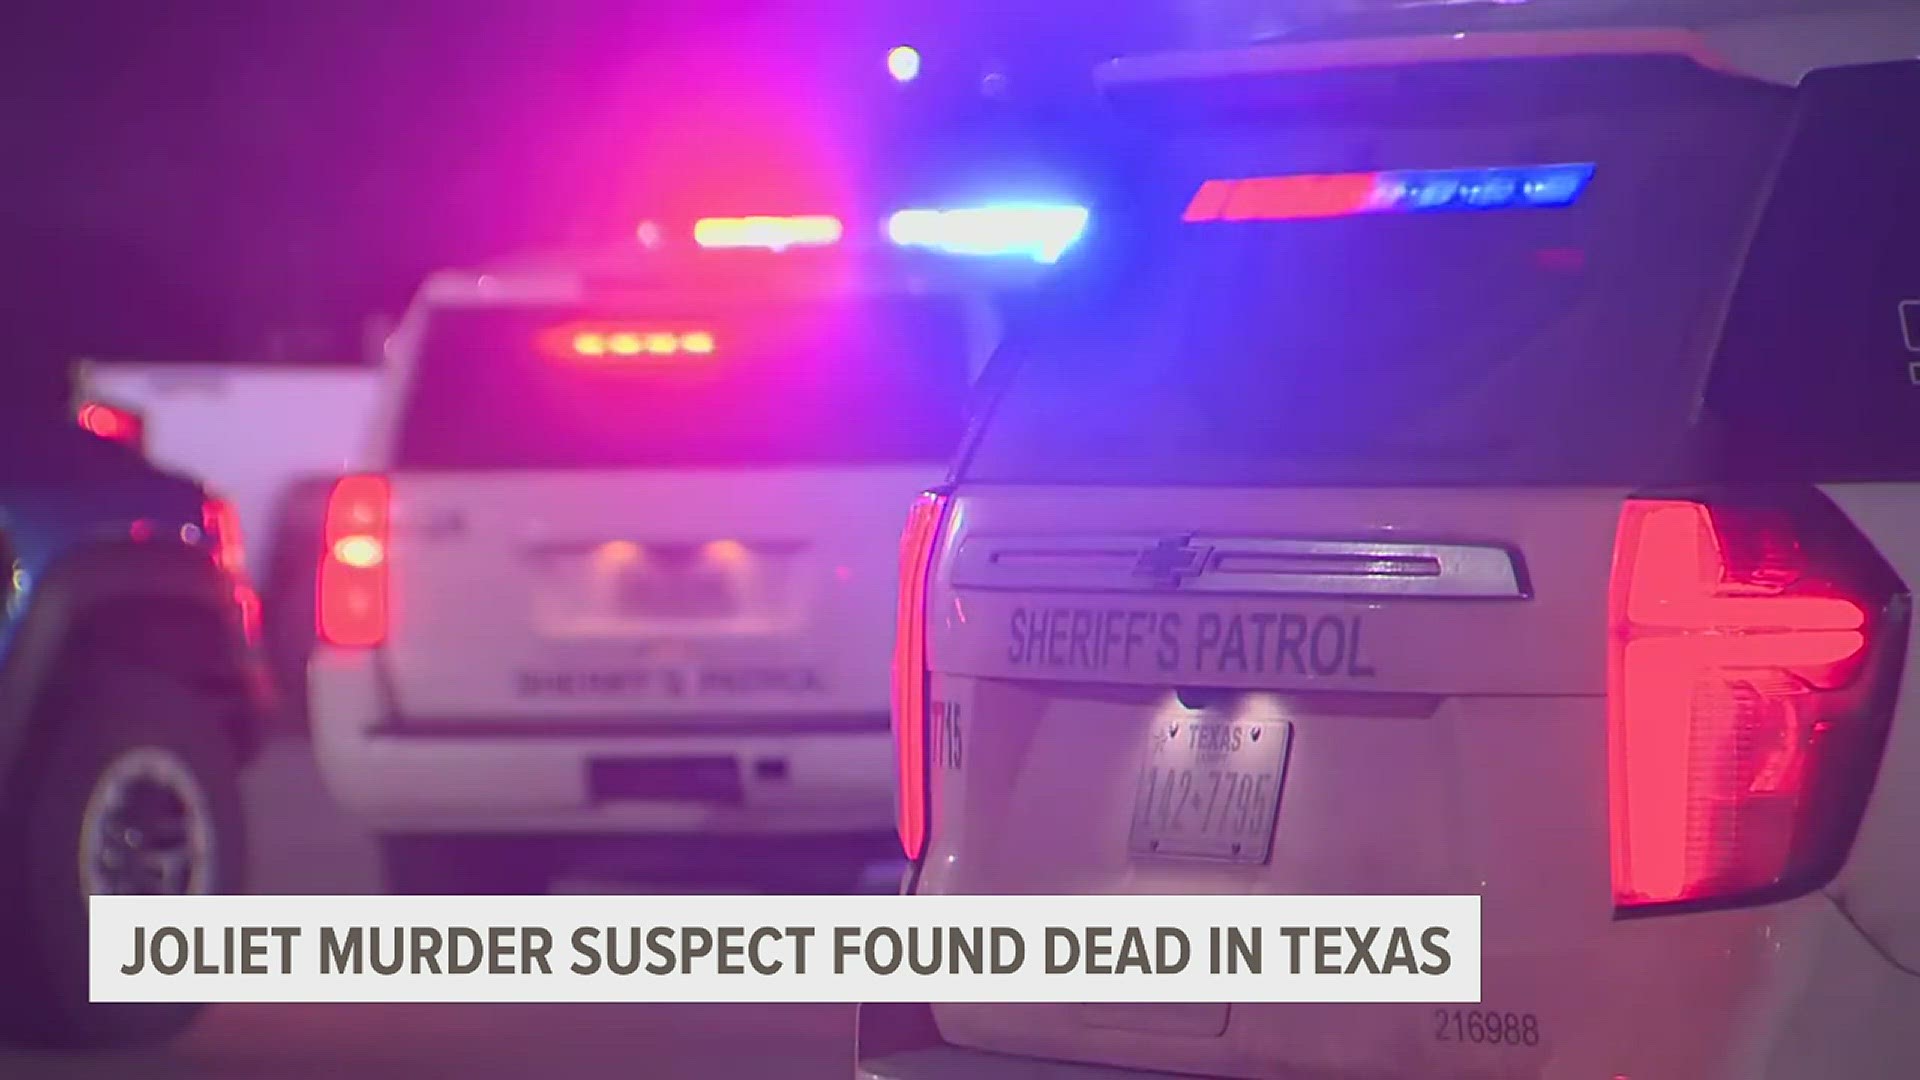 Investigators say 23-year-old Romeo Nance shot 8 people in Joliet. He shot himself near Natalia, Texas, about two hours from the Mexico border.